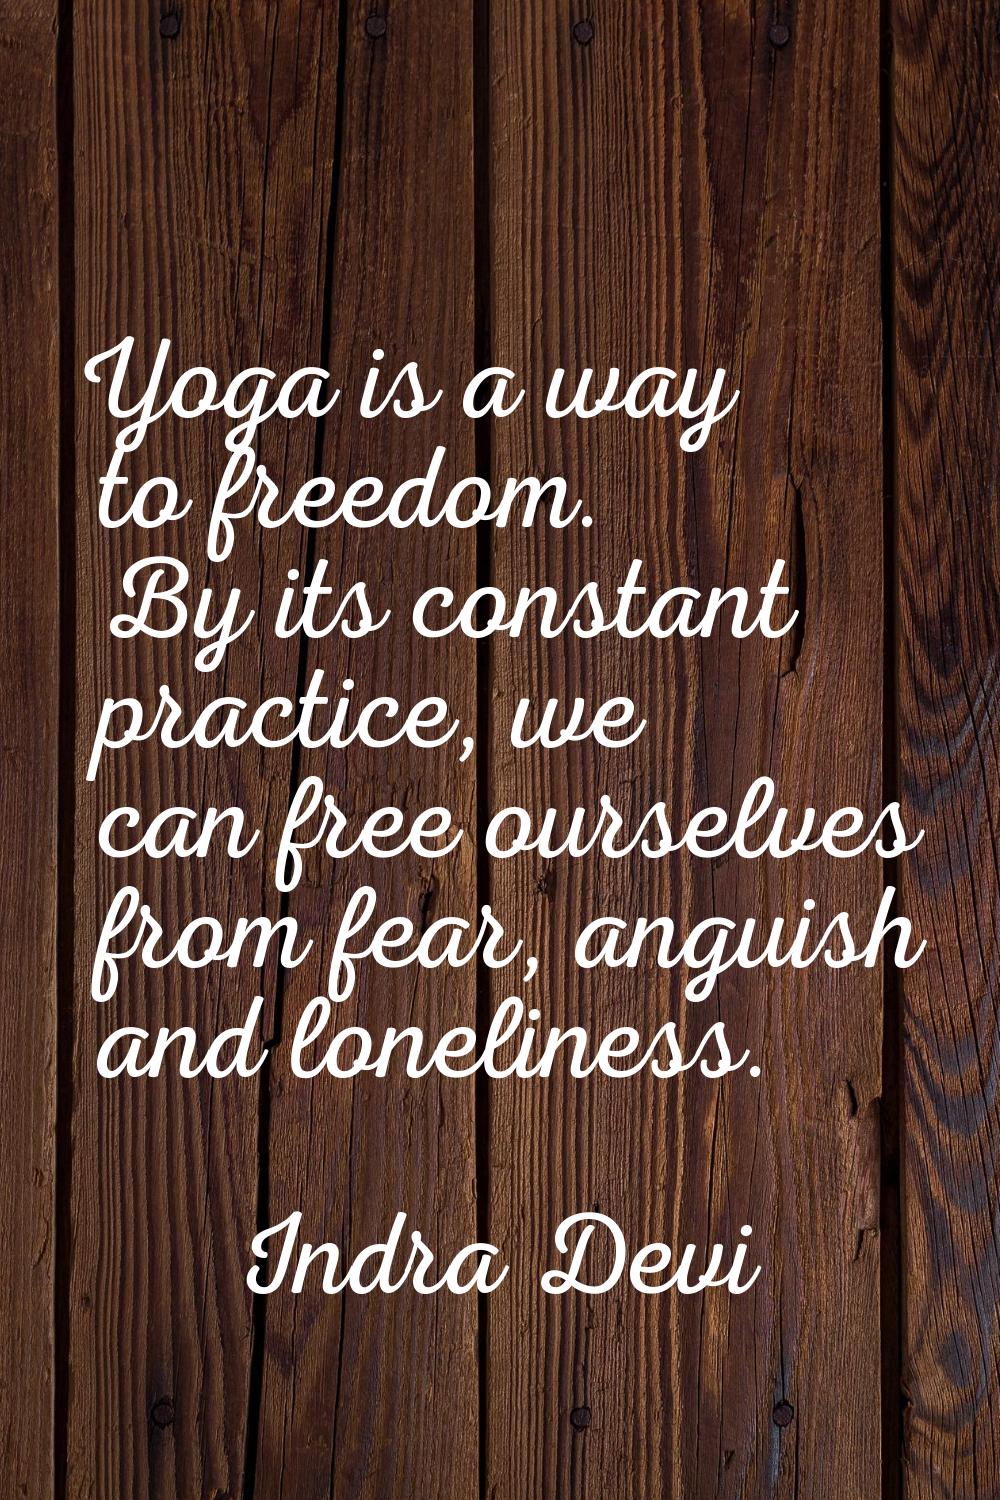 Yoga is a way to freedom. By its constant practice, we can free ourselves from fear, anguish and lo